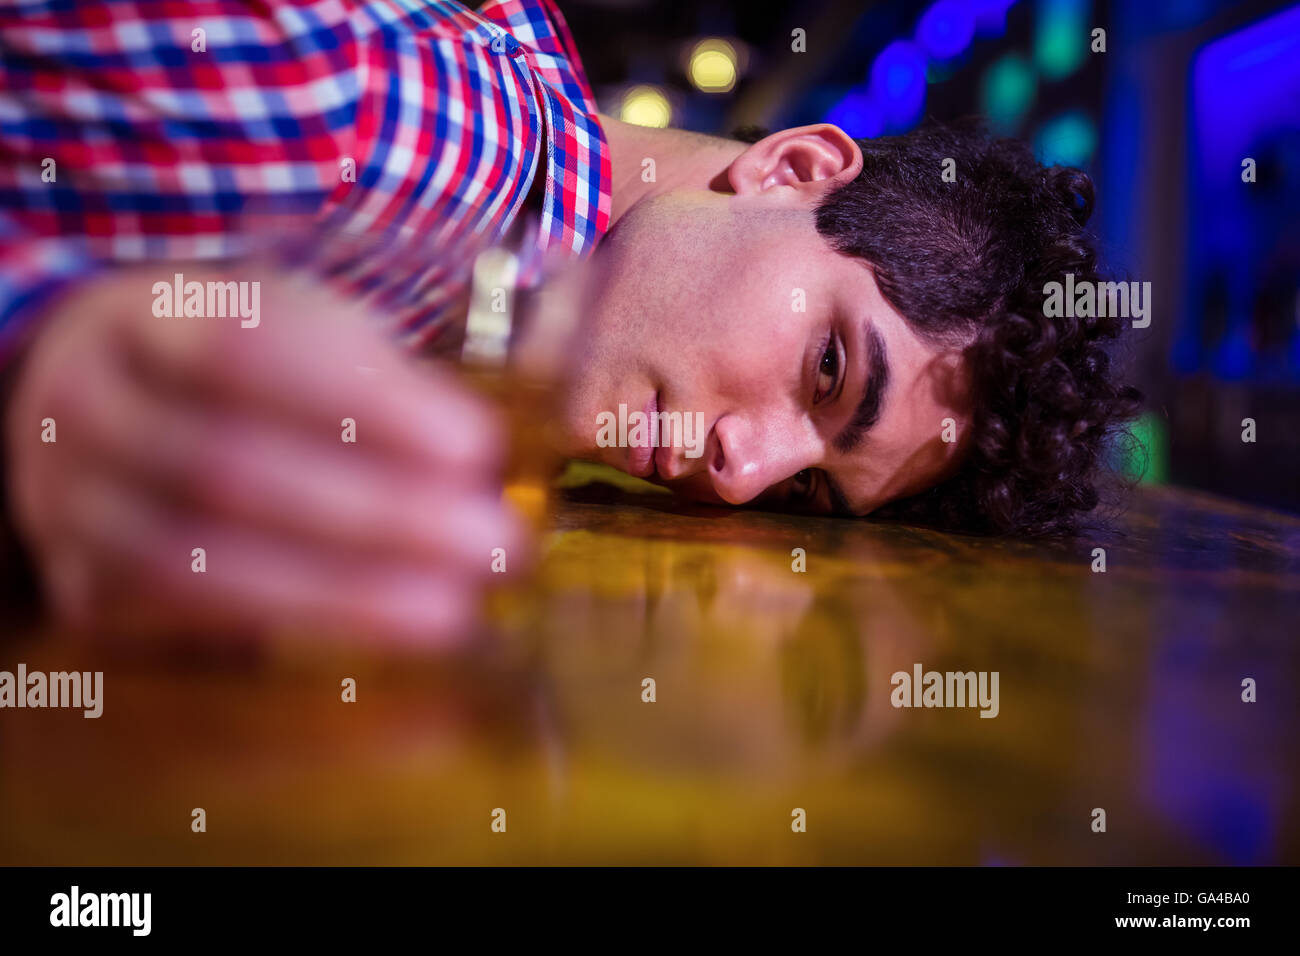 Portrait of drunk man at bar counter Stock Photo